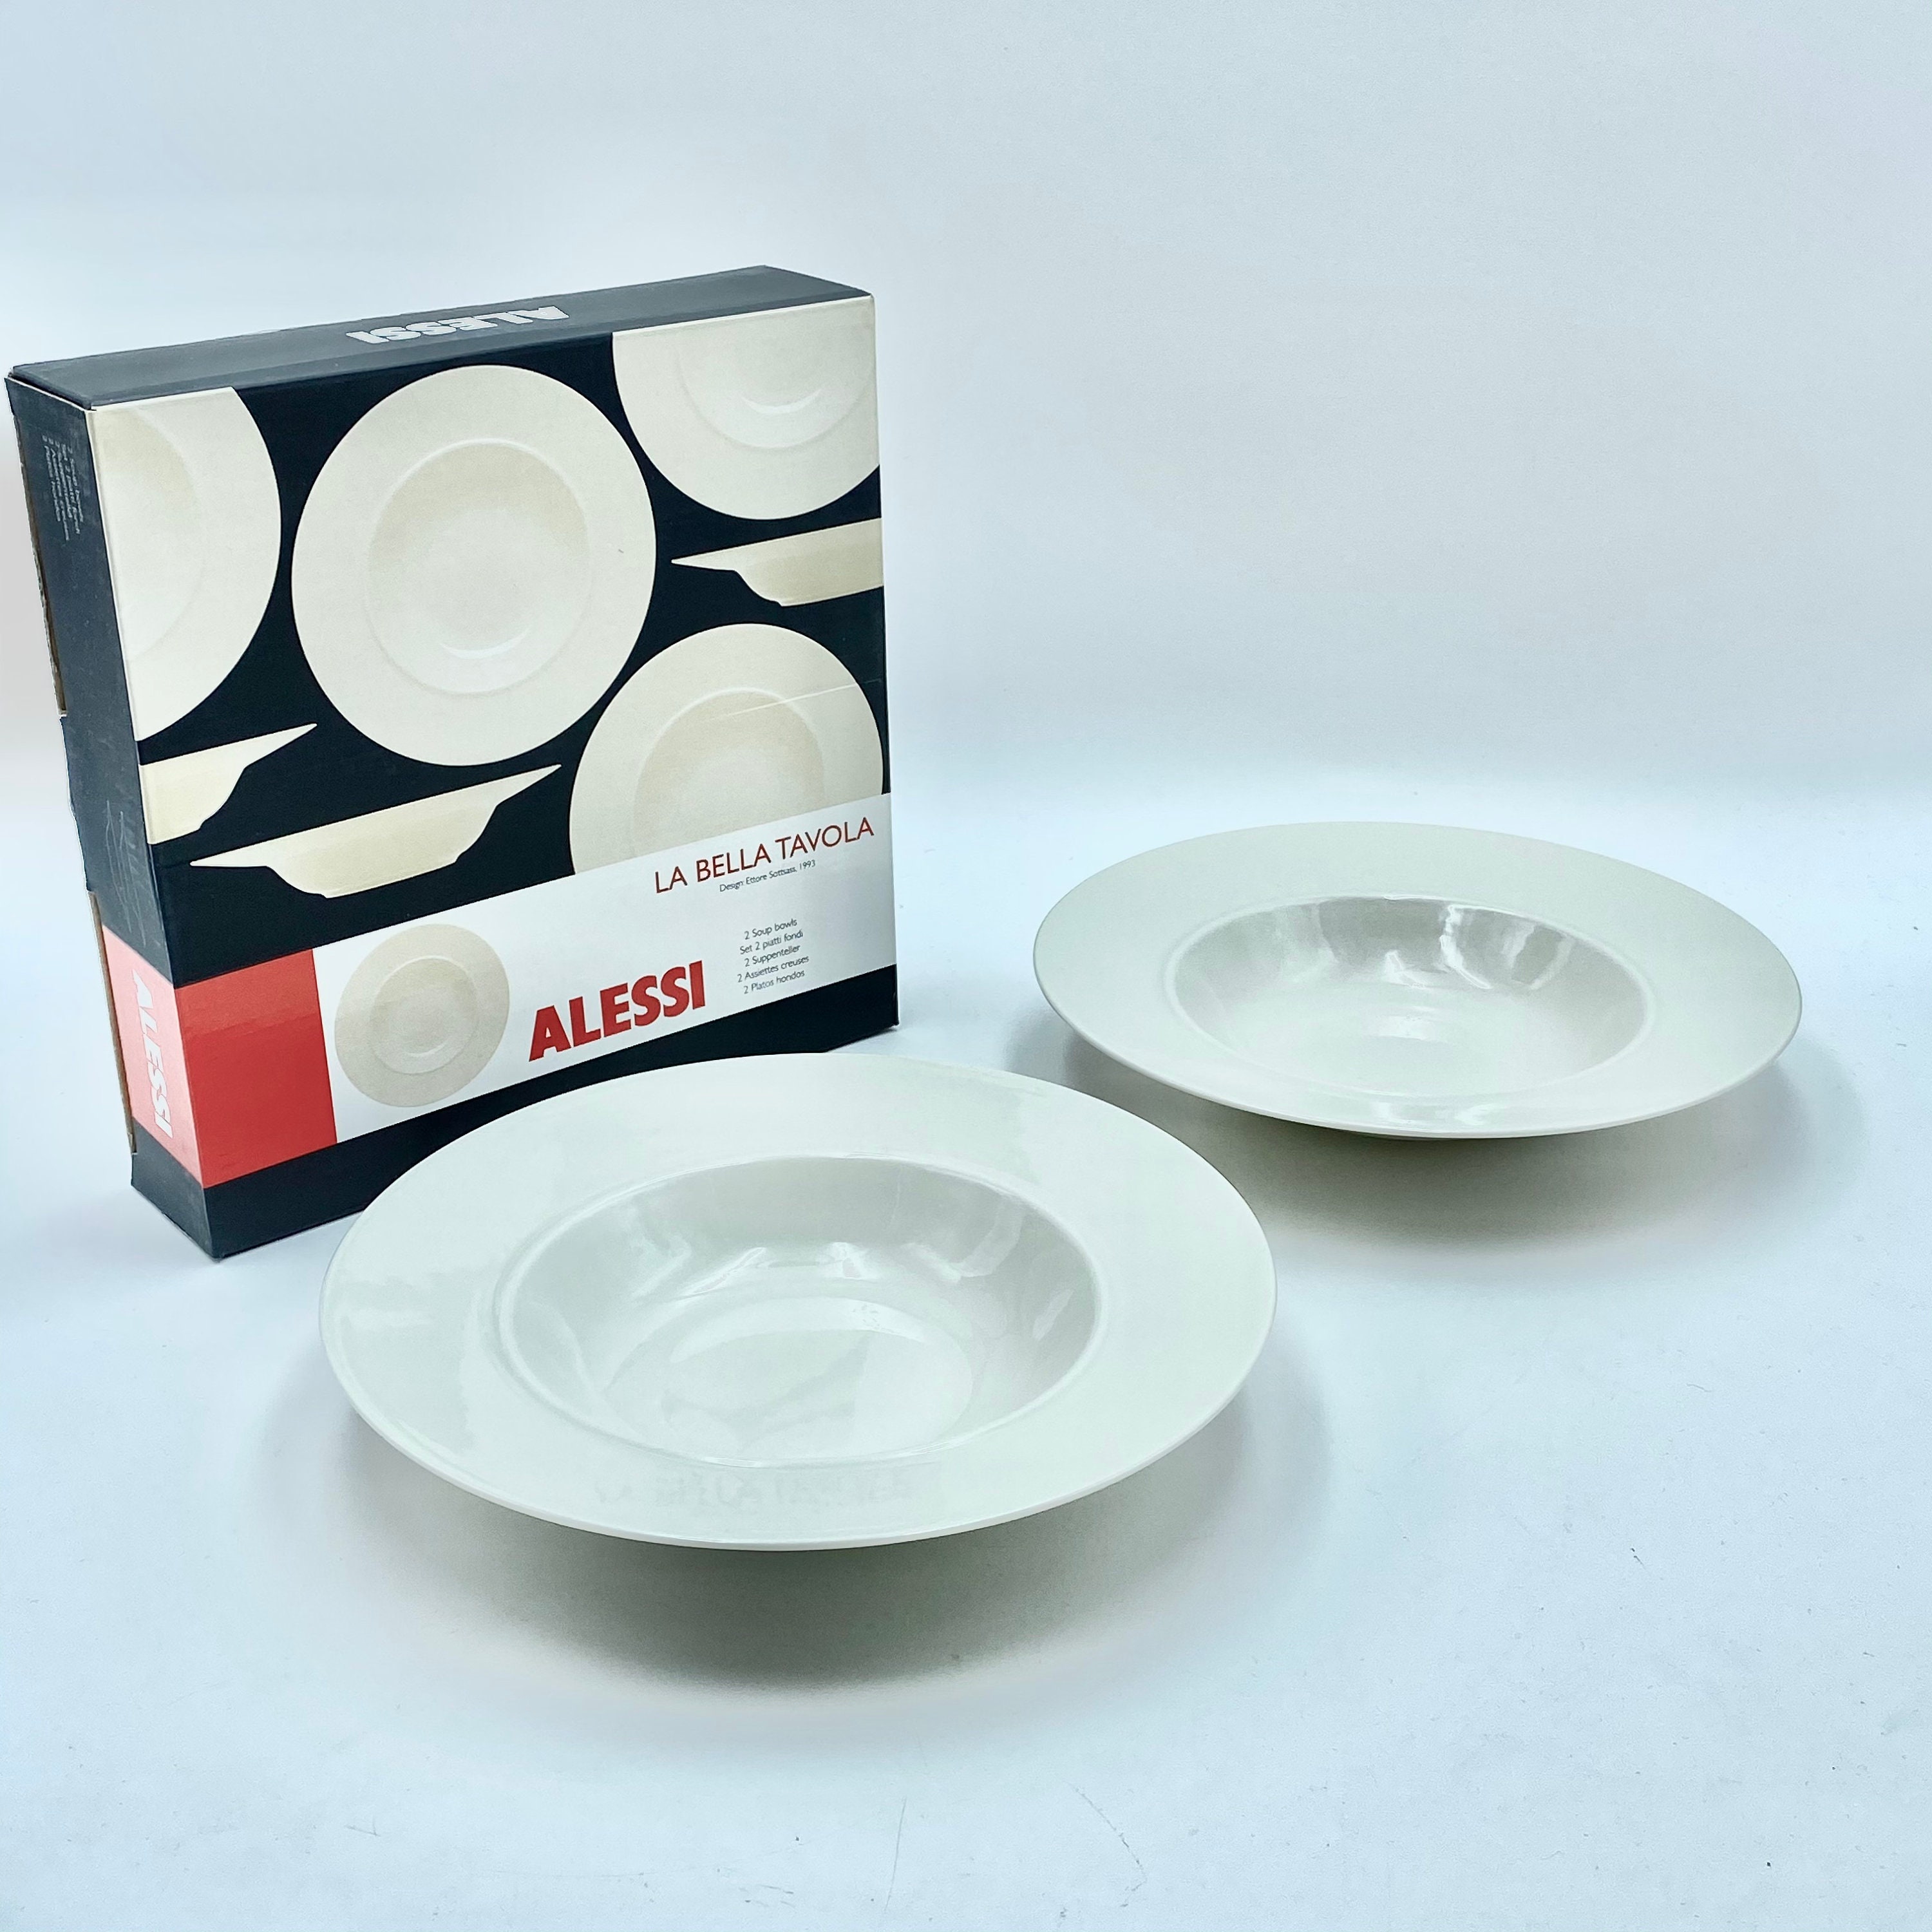 Alessi Pair x 2 Alessi Ettore Sottsass 1993 La Bella Tavola Porcelain Cups and Saucers 